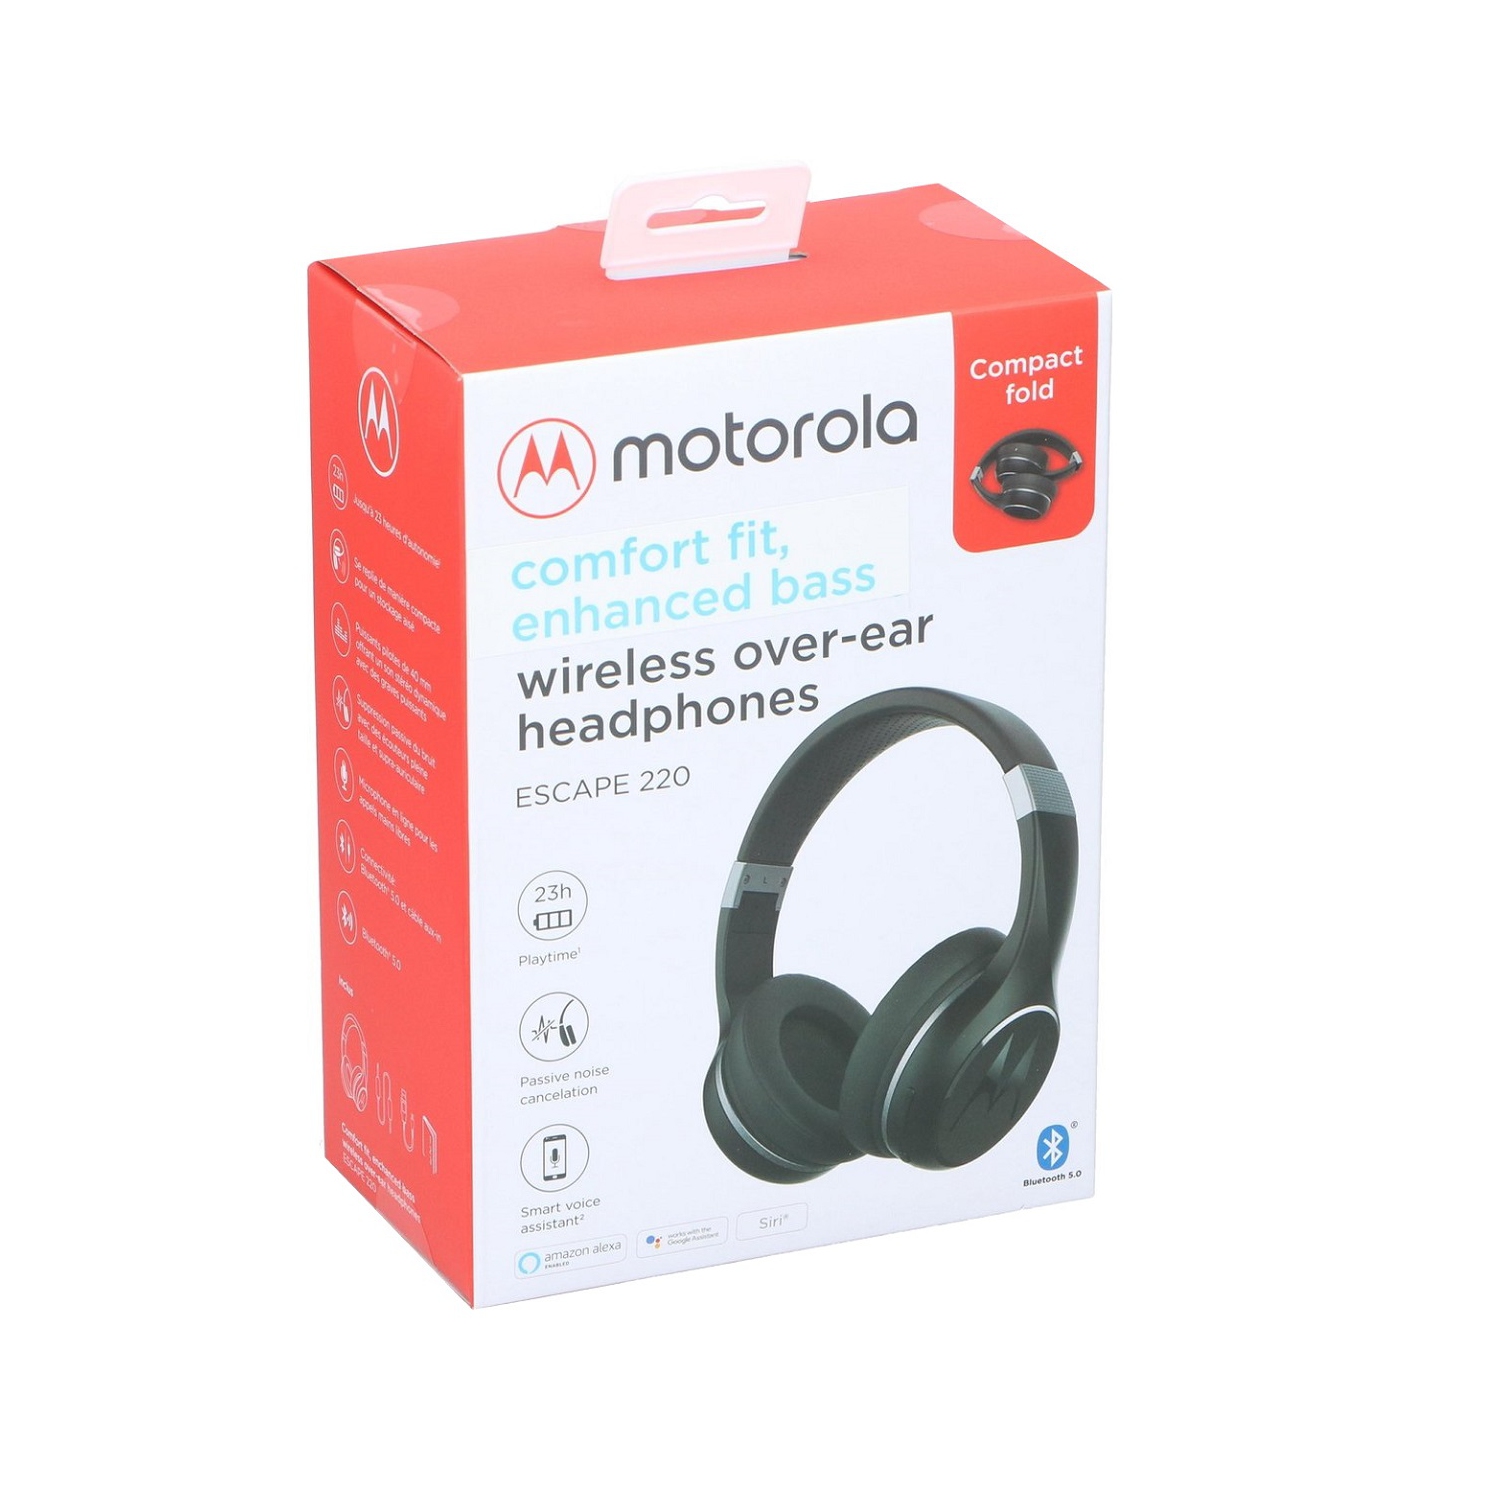 Motorola Escape 220 Over-The-Ear Bluetooth Wireless Headphones - HD Sound, Built-in Microphone, 23-Hour Play Time, Noise Isolation - Foldable & Compact - Black